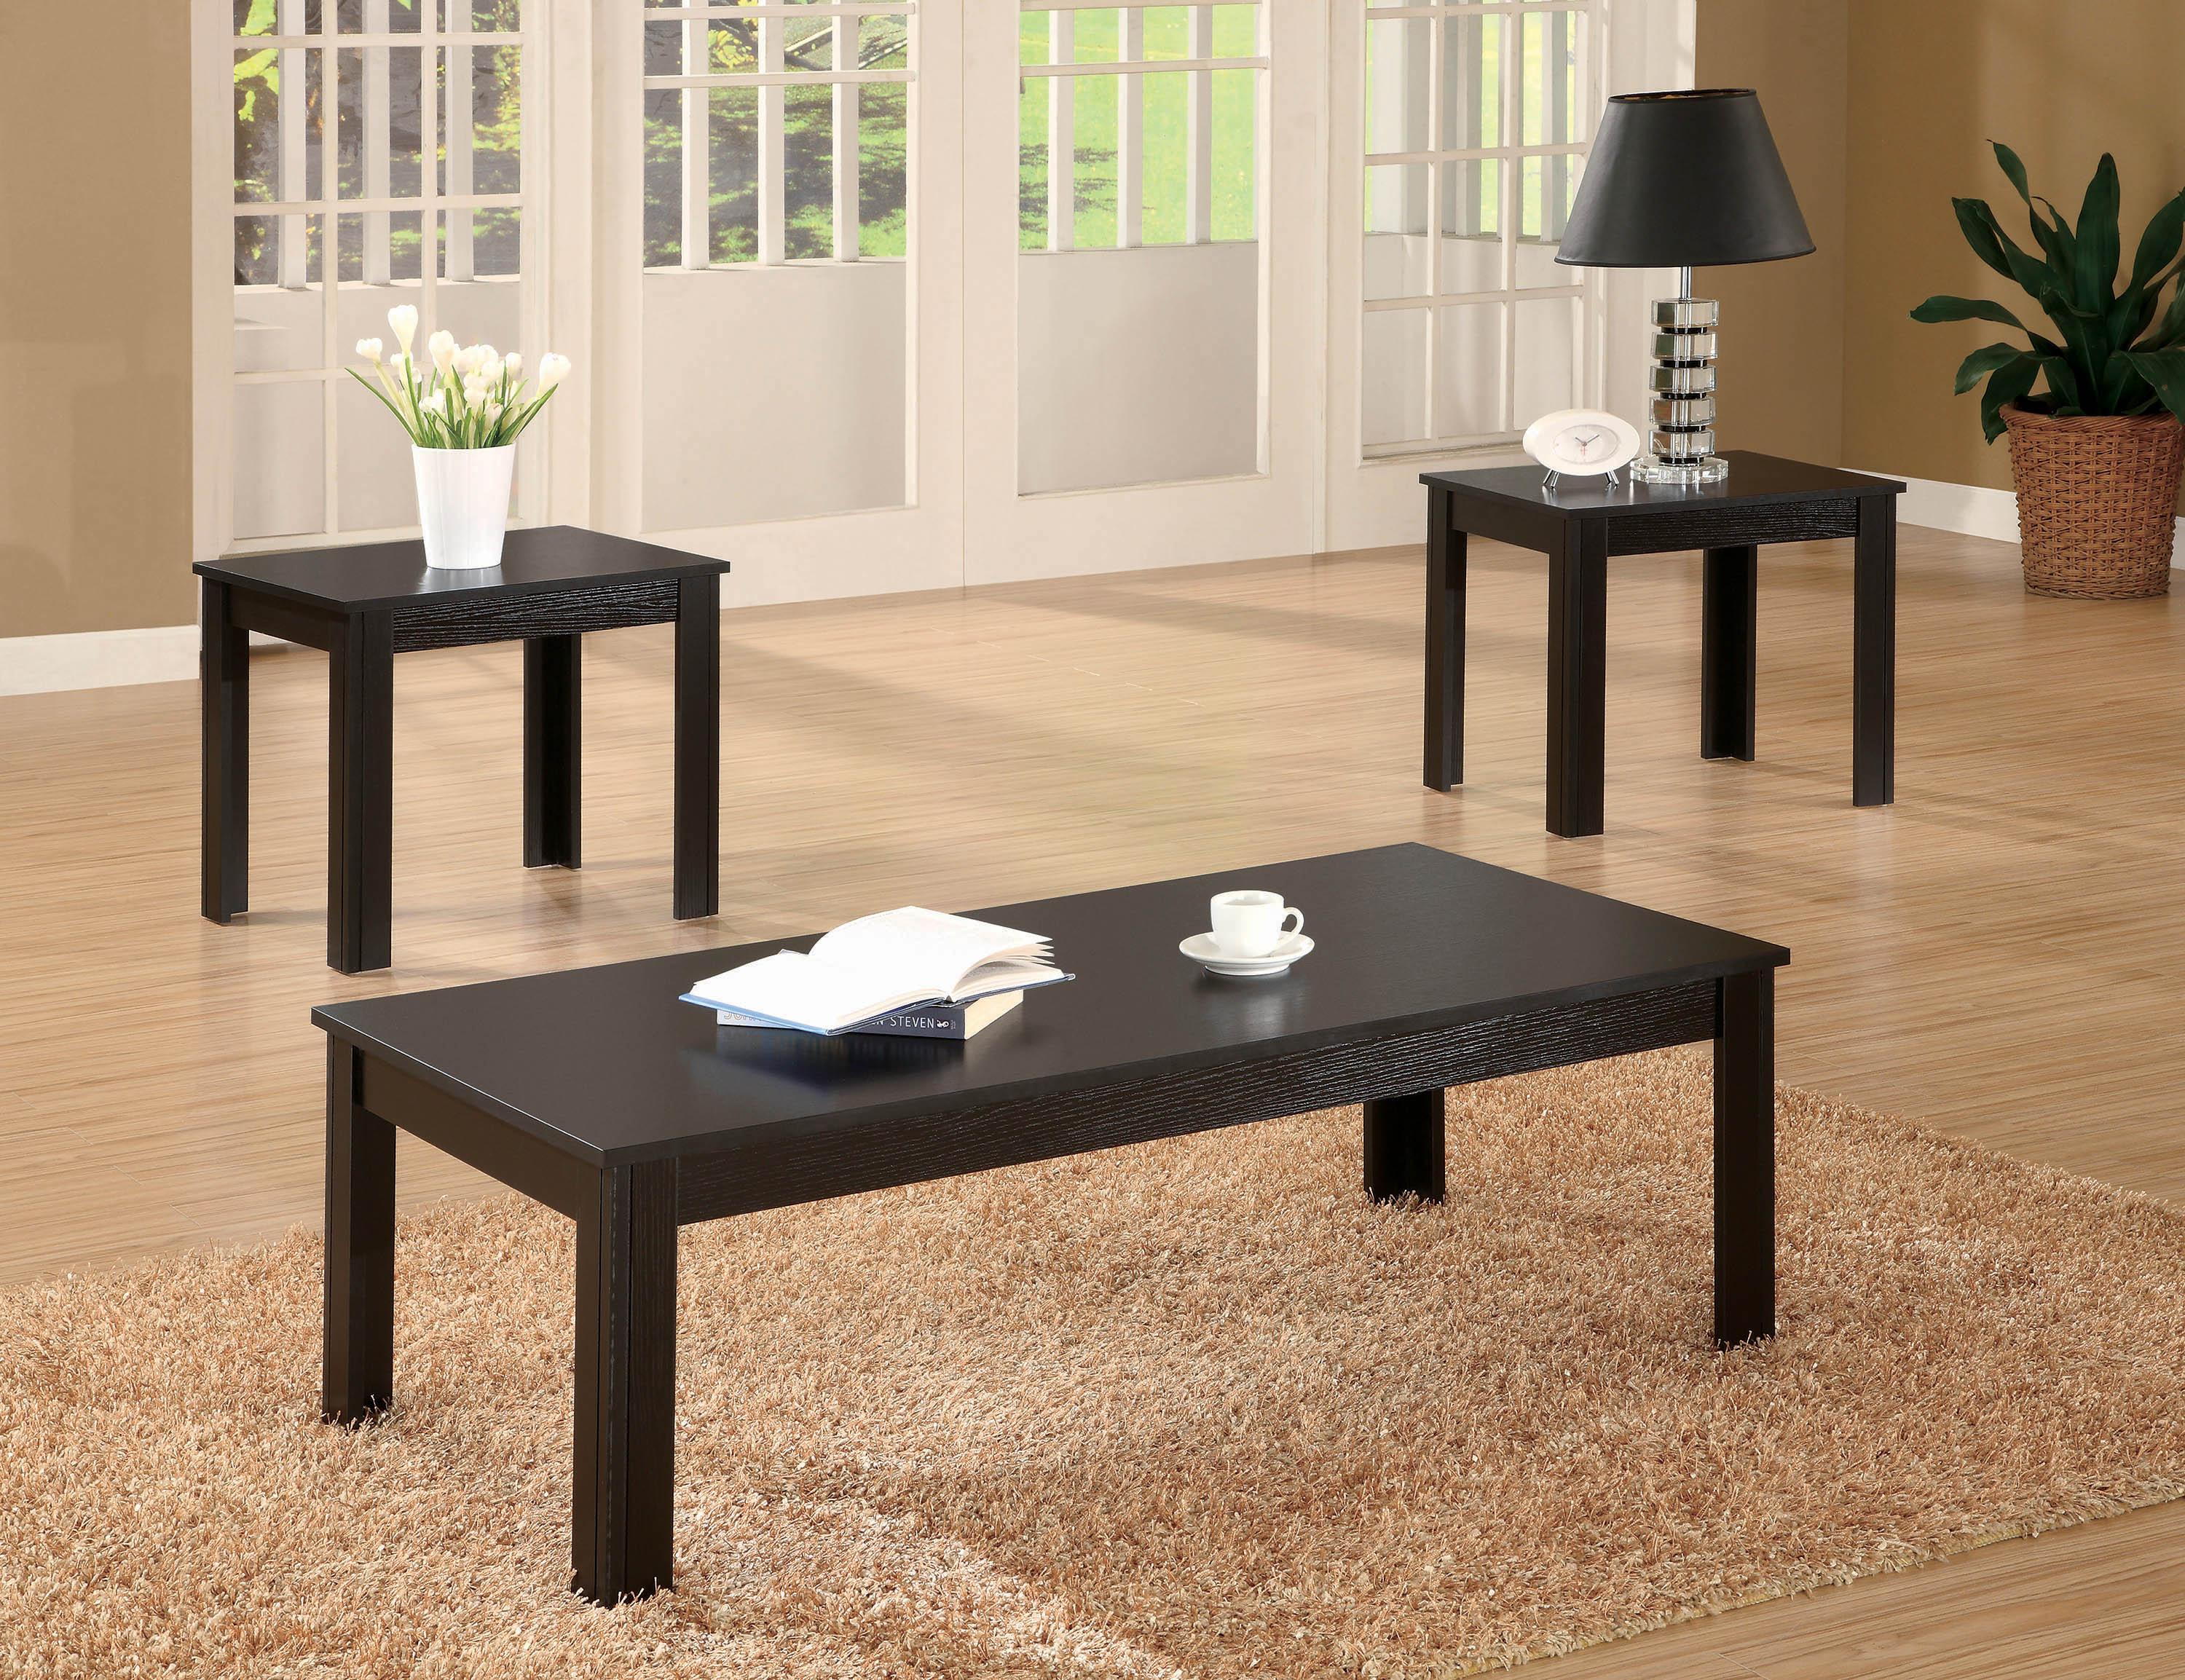 Modern Occasional Table Set 700225 700225 in Black 